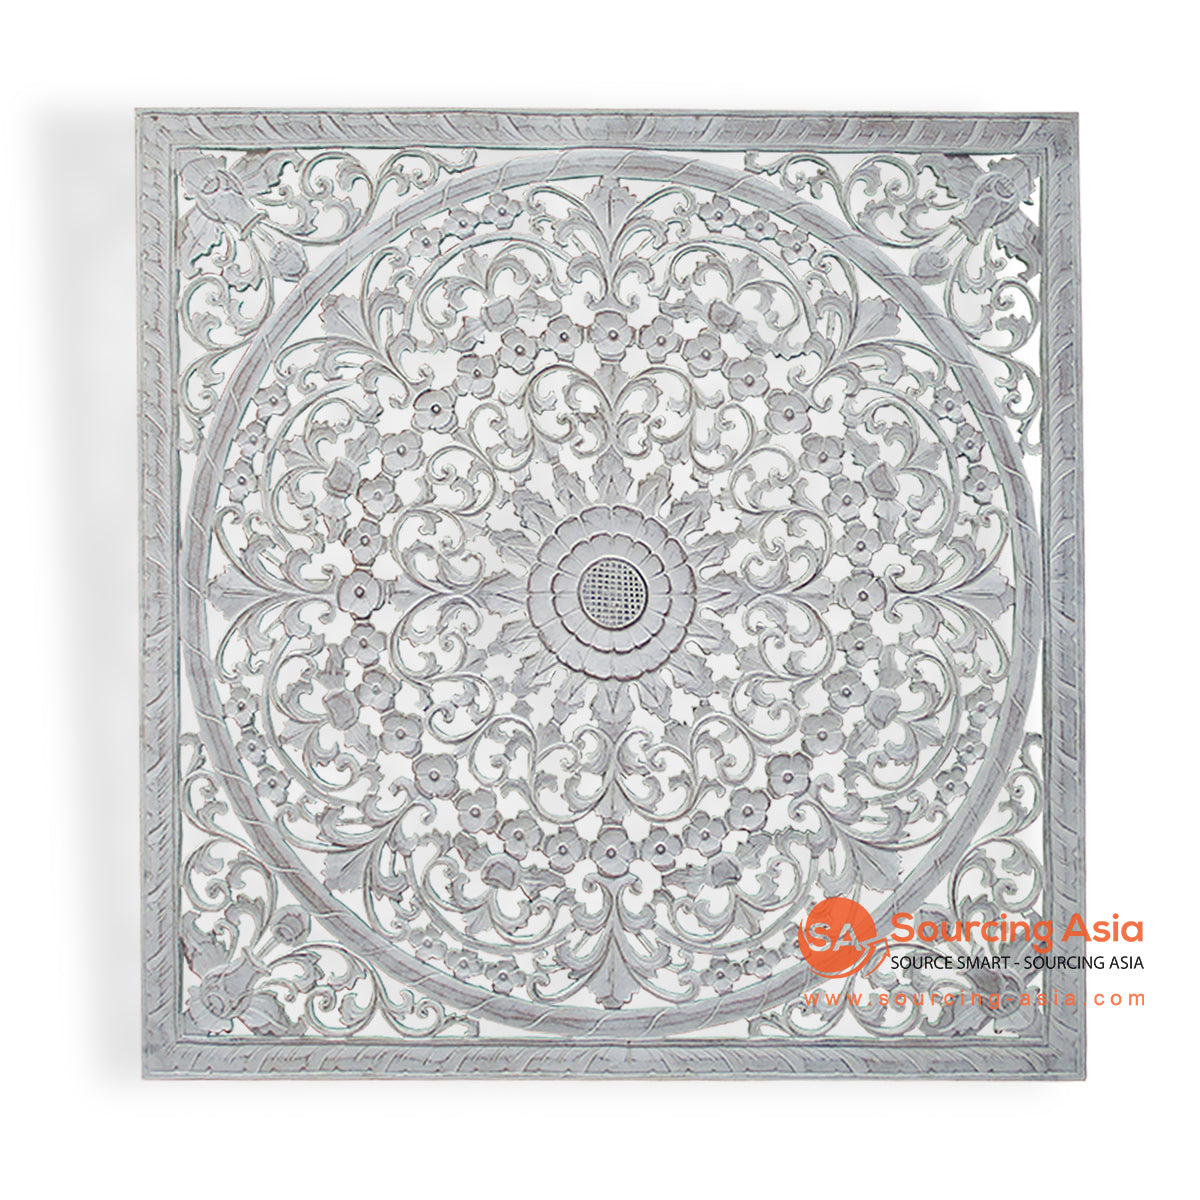 LUH018-120WW WHITE WASH MDF WOOD SQUARE JEPARA CARVED PANEL